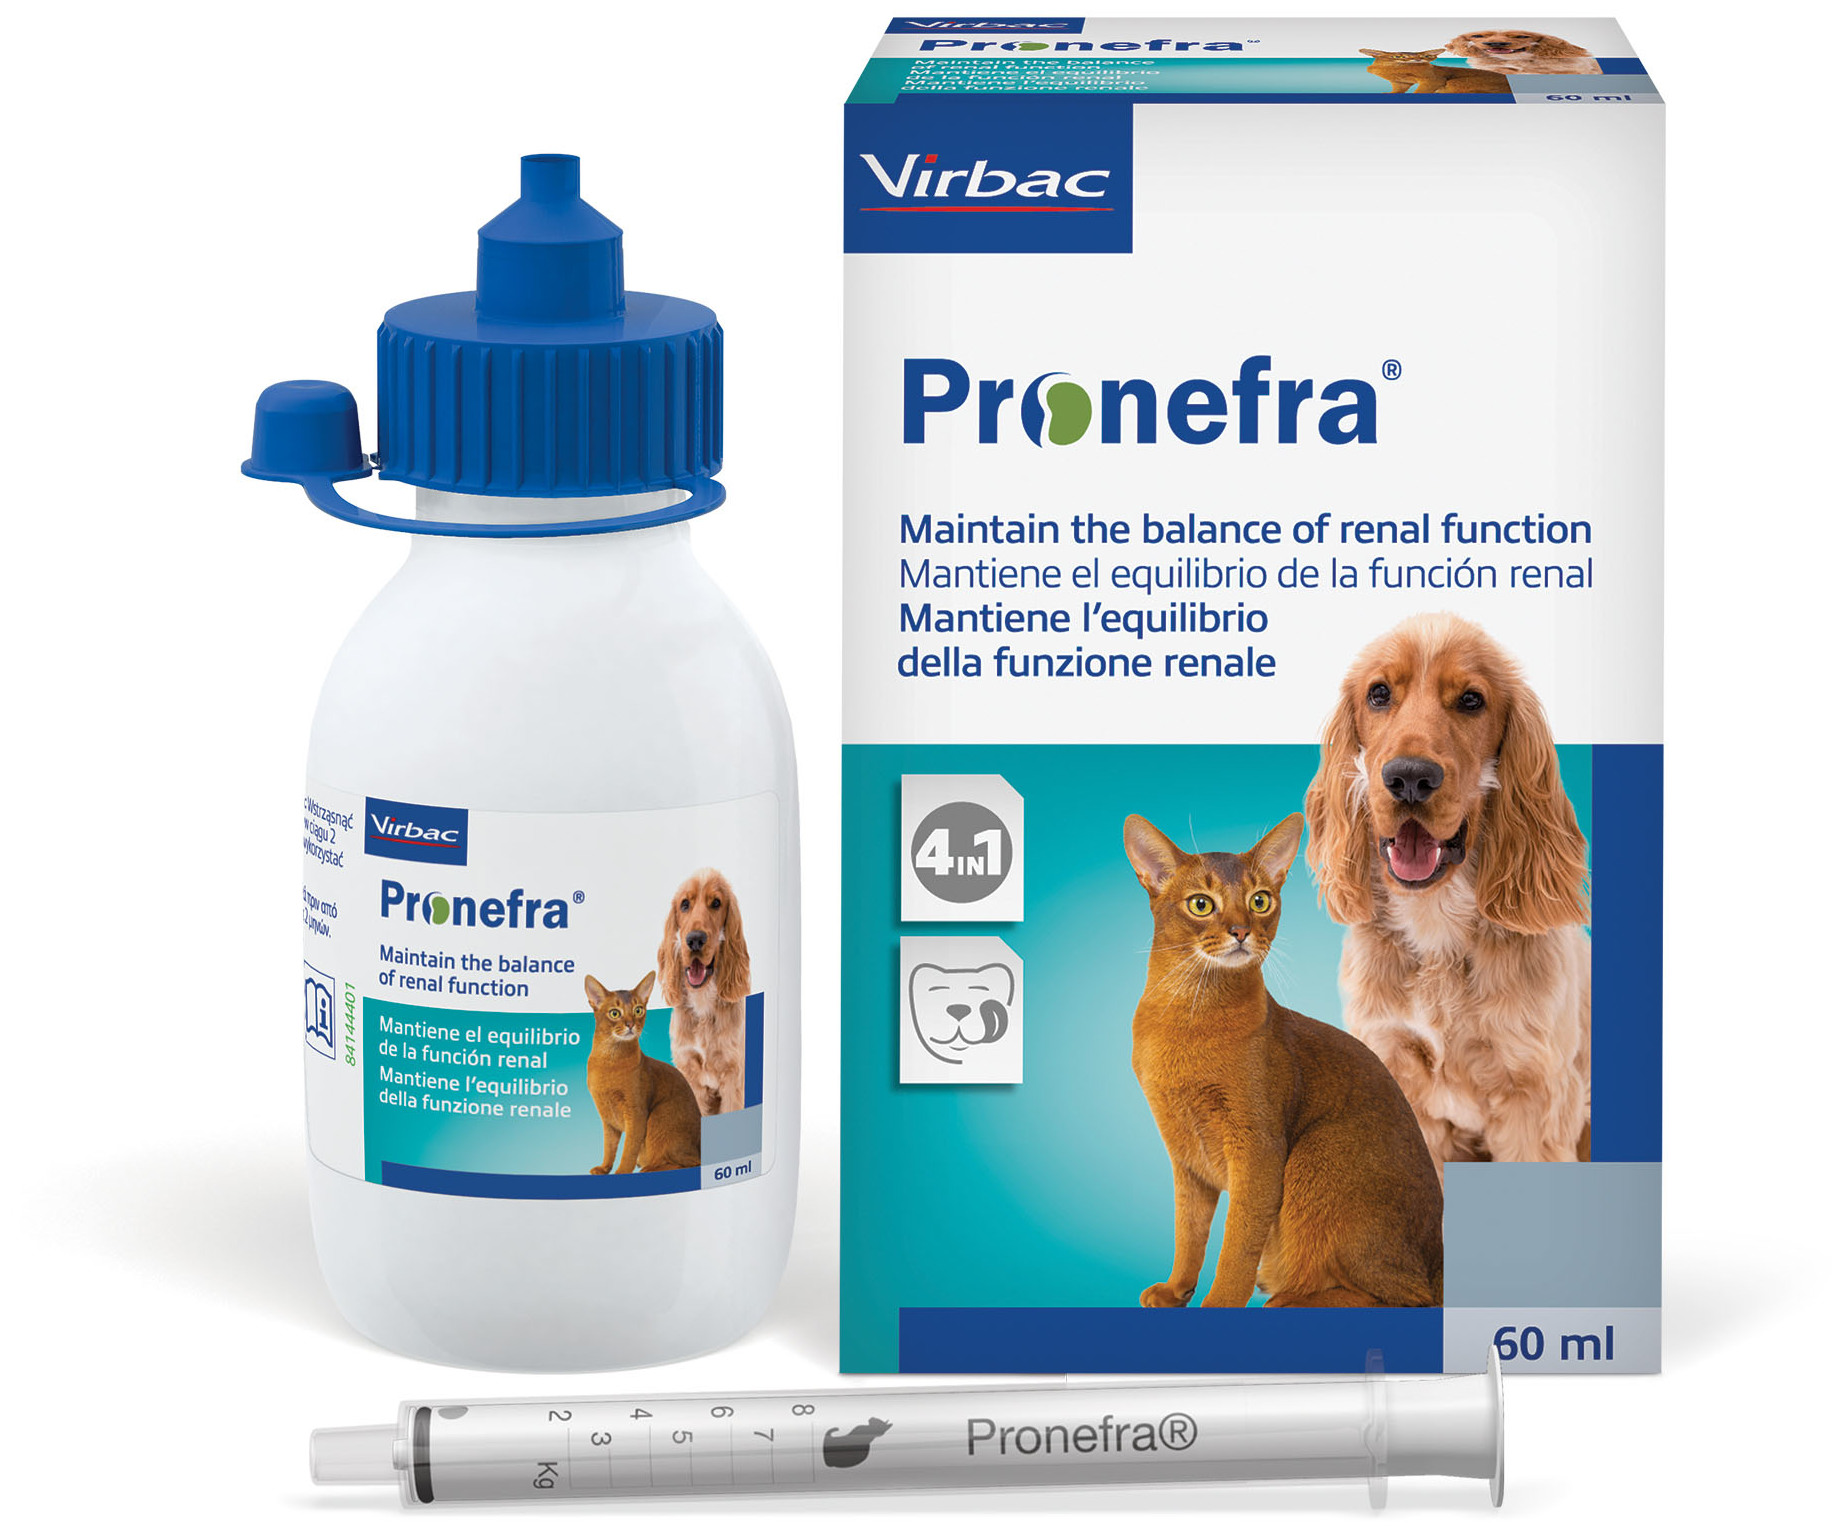 Virbac Ponefra for Renal Problems in Dogs and Cats